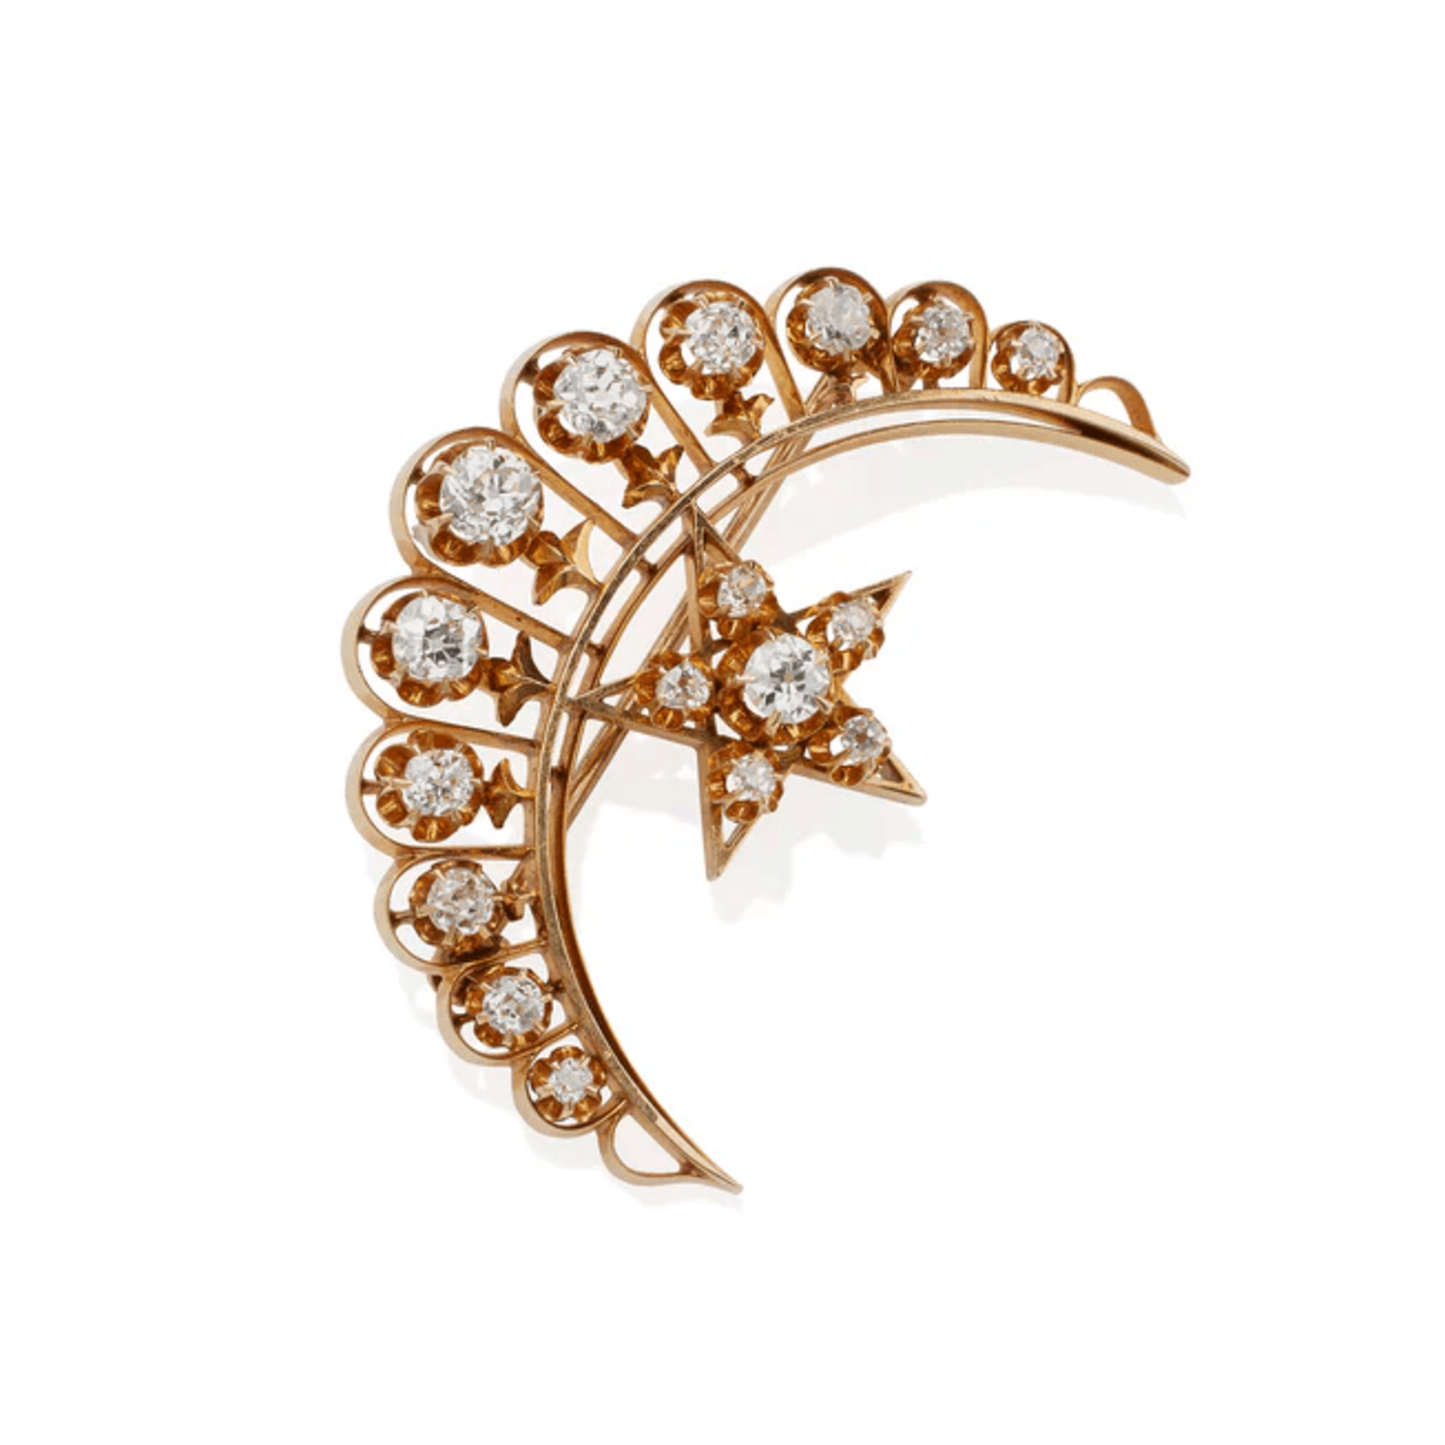 Victorian 18KT Yellow Gold Diamond Brooch front